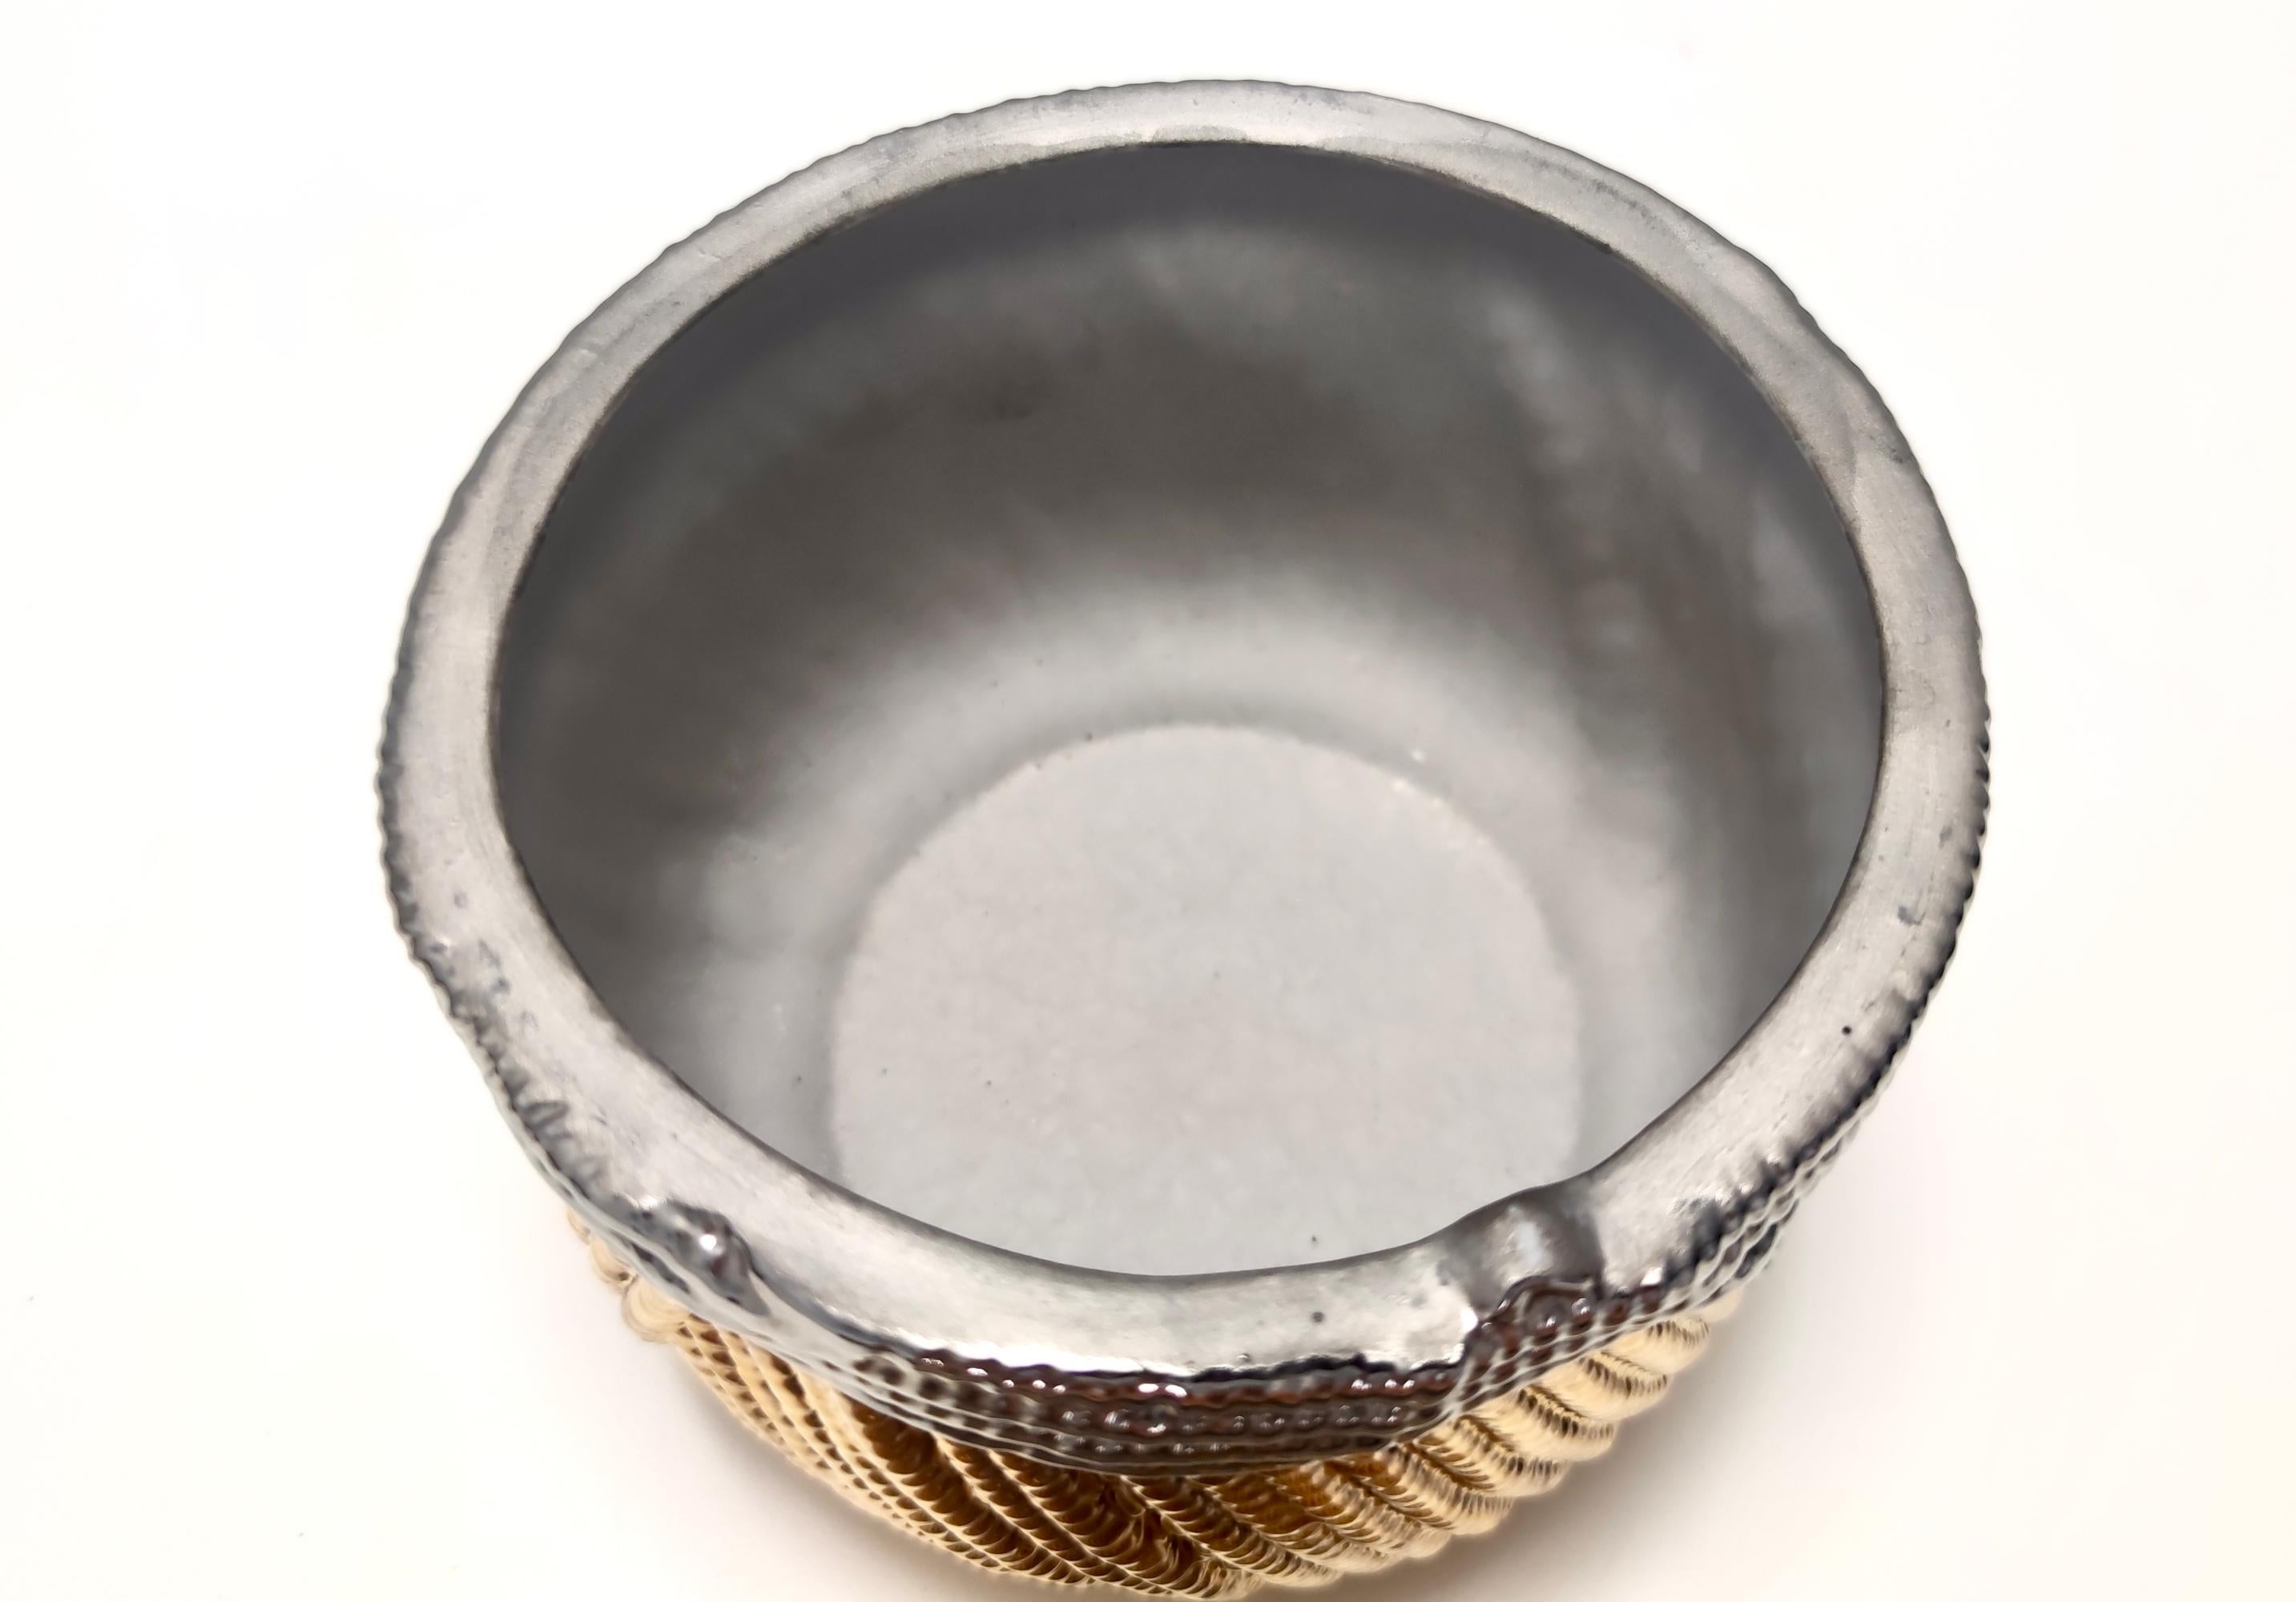 Glazed Postmodern Gold and Silver Ceramic Trinket Bowl / Box by San Marco, Italy For Sale